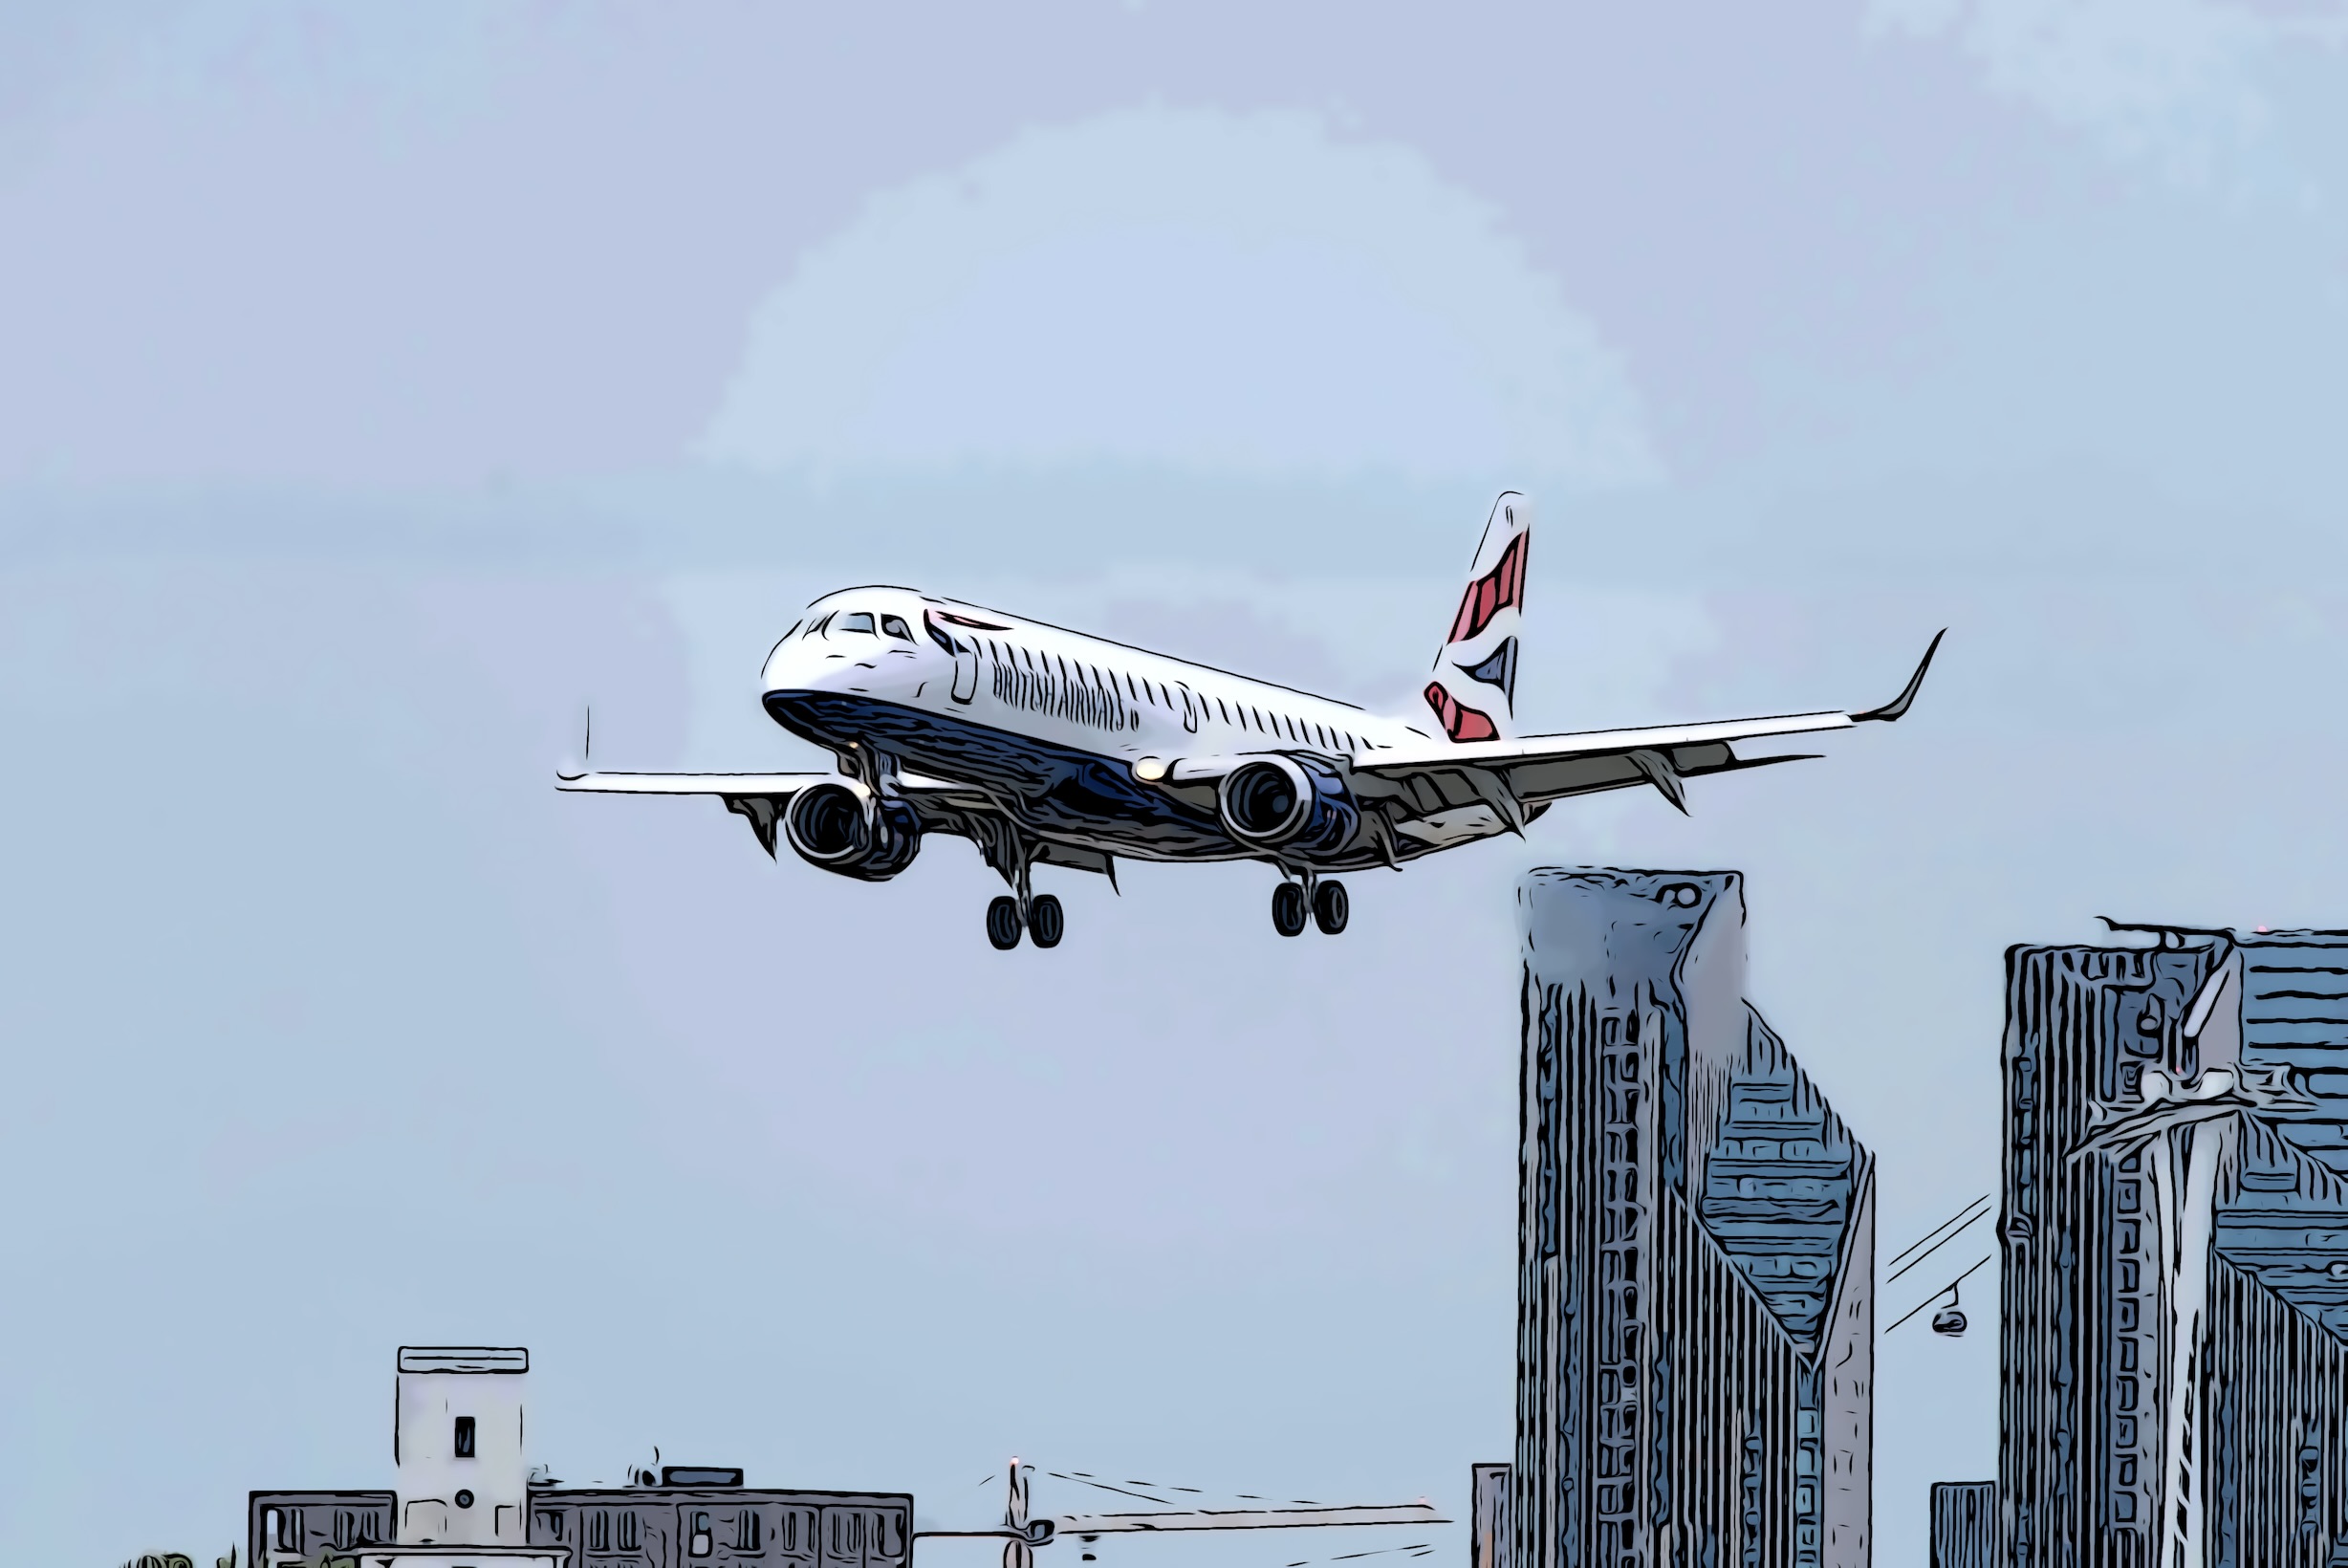 London city airport flight path passing over Canary Wharf